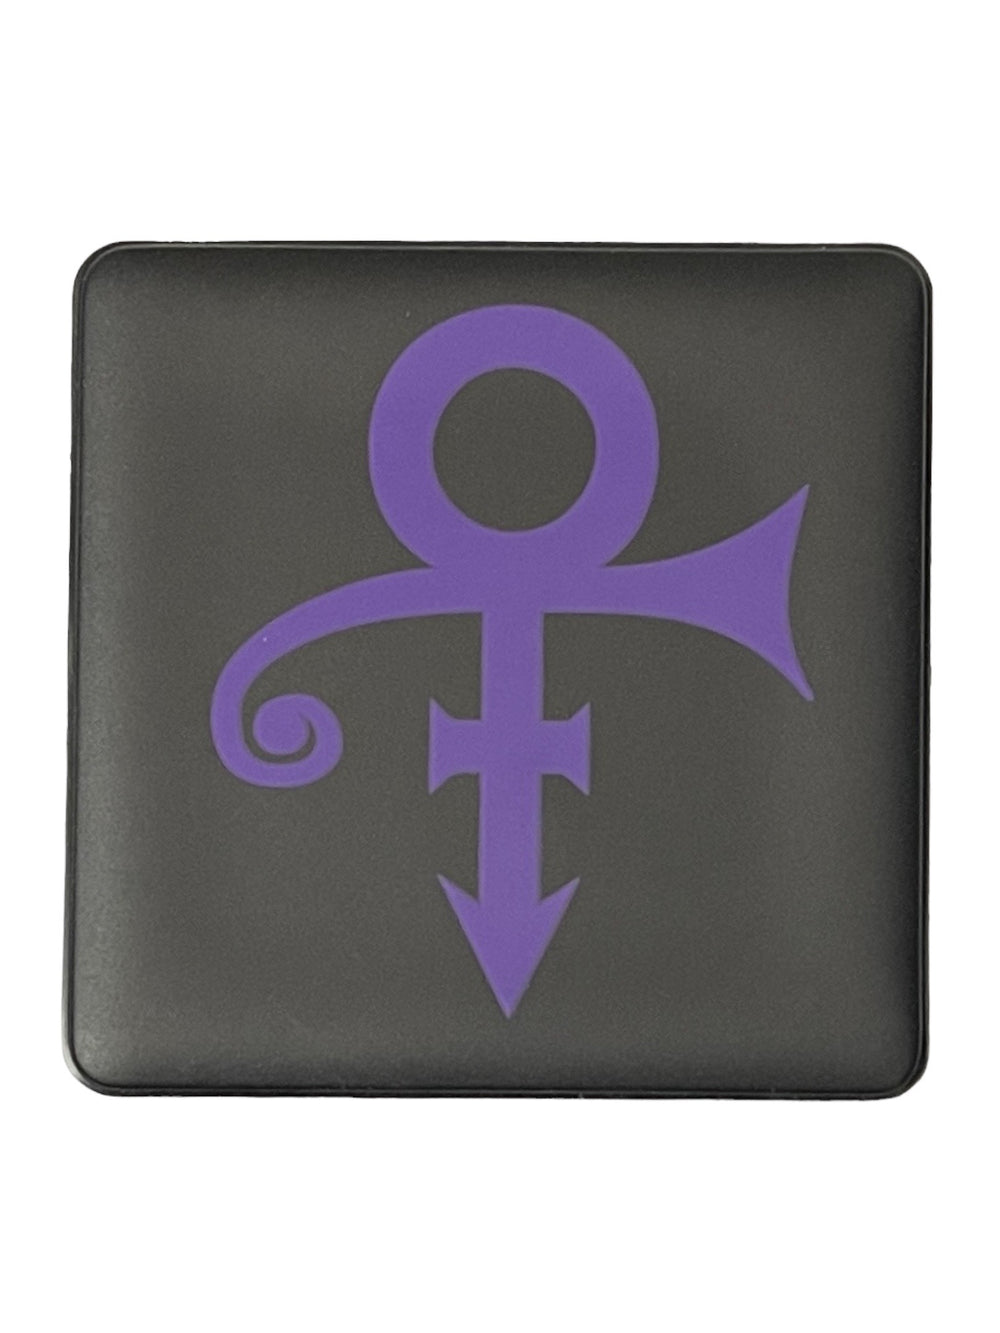 Official Prince Coaster XCLUSIVE  Limited Edition Love Symbol Design